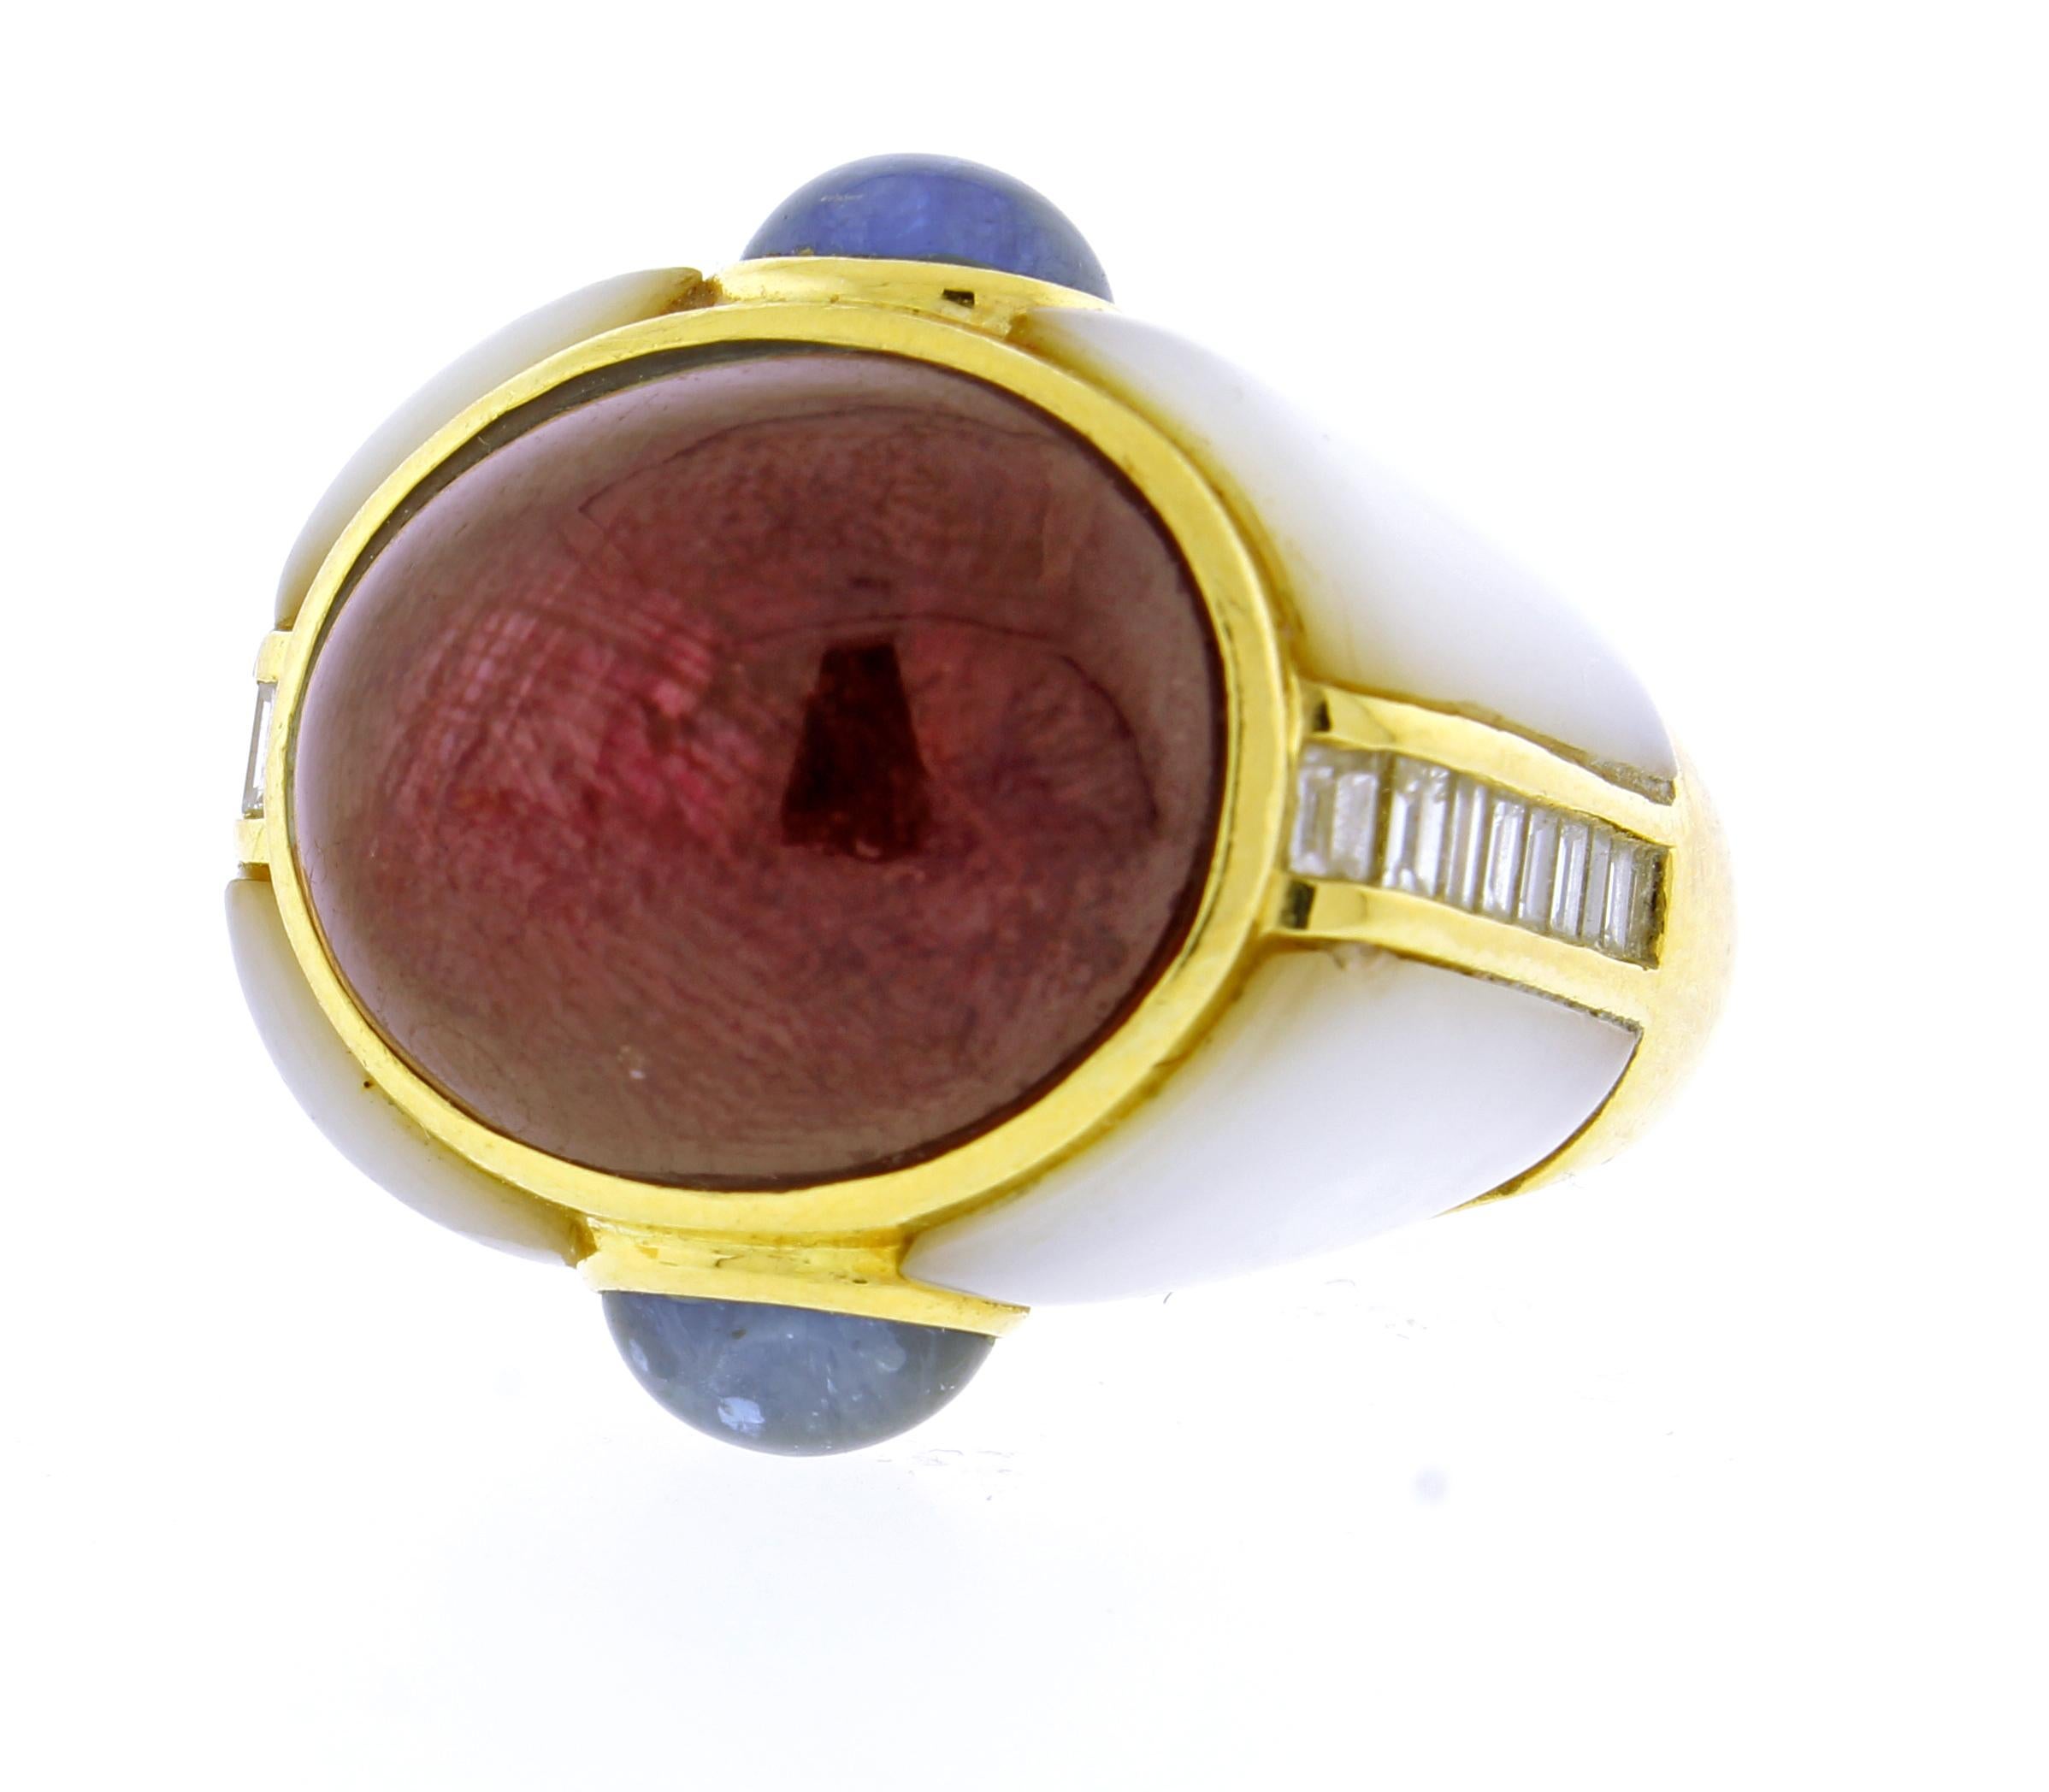 From  Kai-Yin Lo, a Cabochon Ruby, set with sapphire and diamond in a mother of pearl dome ring.
♦ Designer: Kai-Yin Lo 
♦ Metal: 18 karat
♦ Cabochon Ruby 16.½ X 13.½mm
♦ Cabochons sapphires  6 ½ X  5 ½
♦ Circa 2010
♦ 20 Diamonds=.90 carats
♦ Size